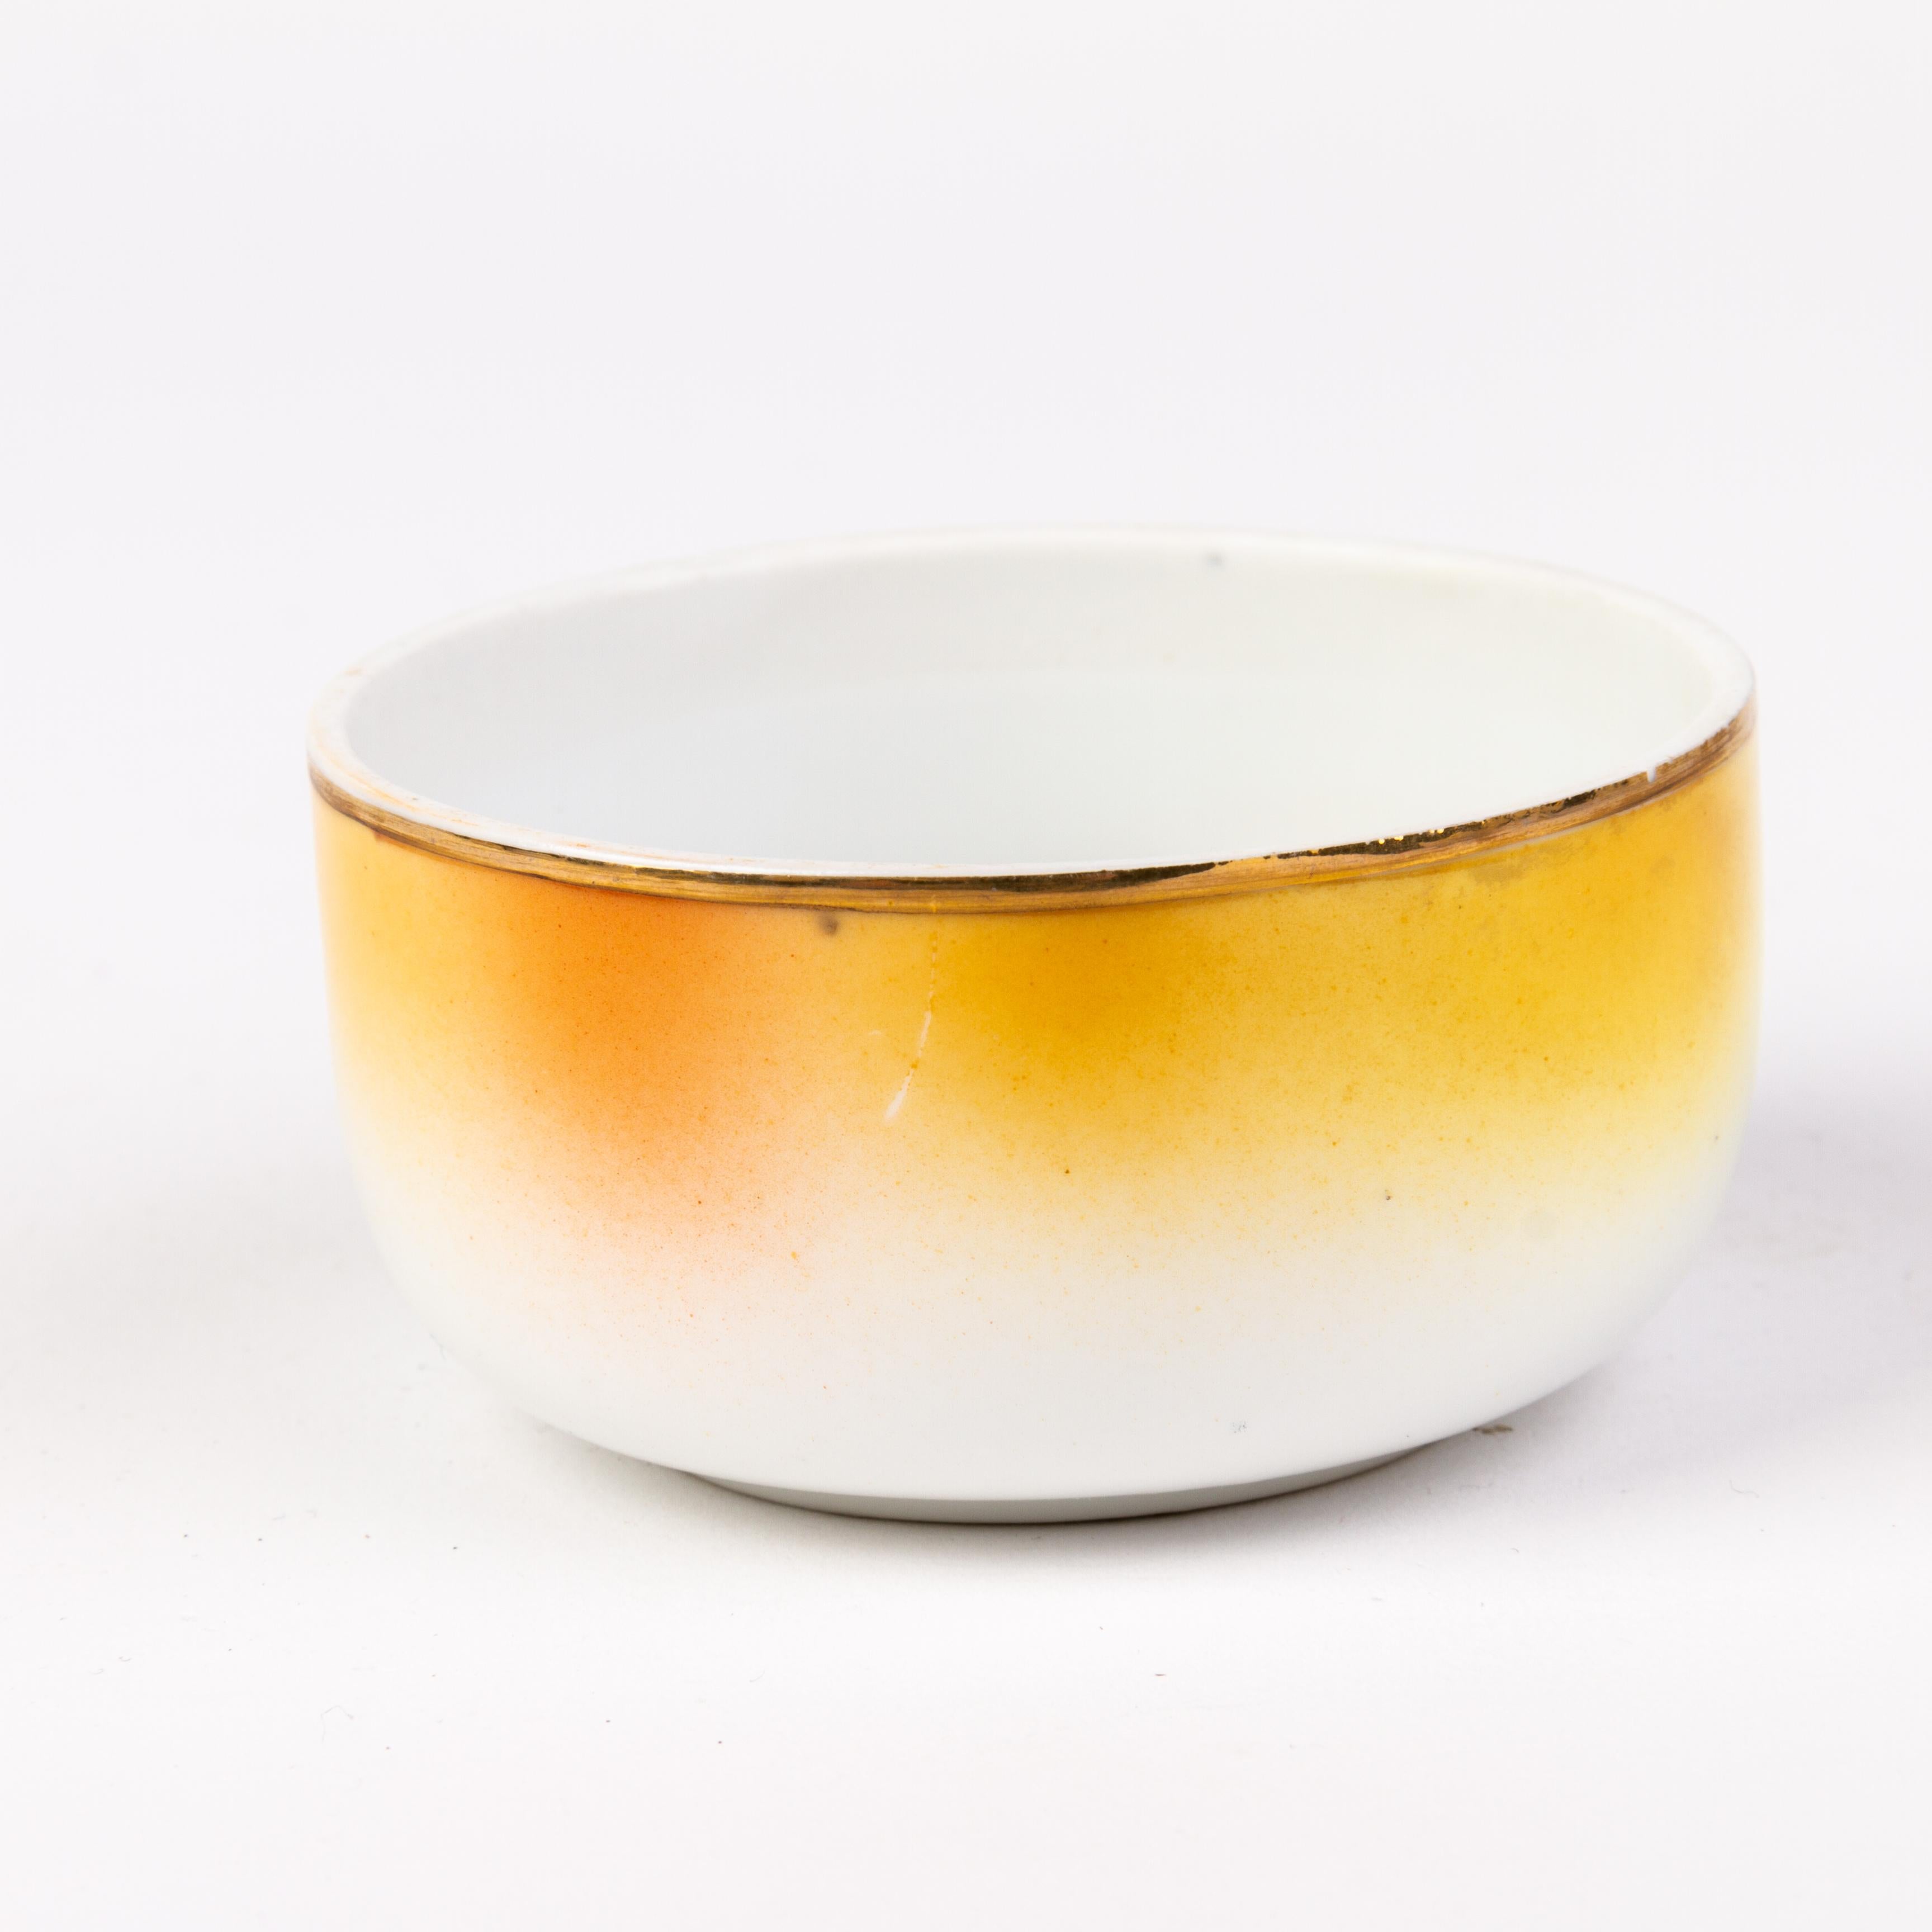 In good condition
From a private collection
Art Deco Japanese Noritake Porcelain Bowl 